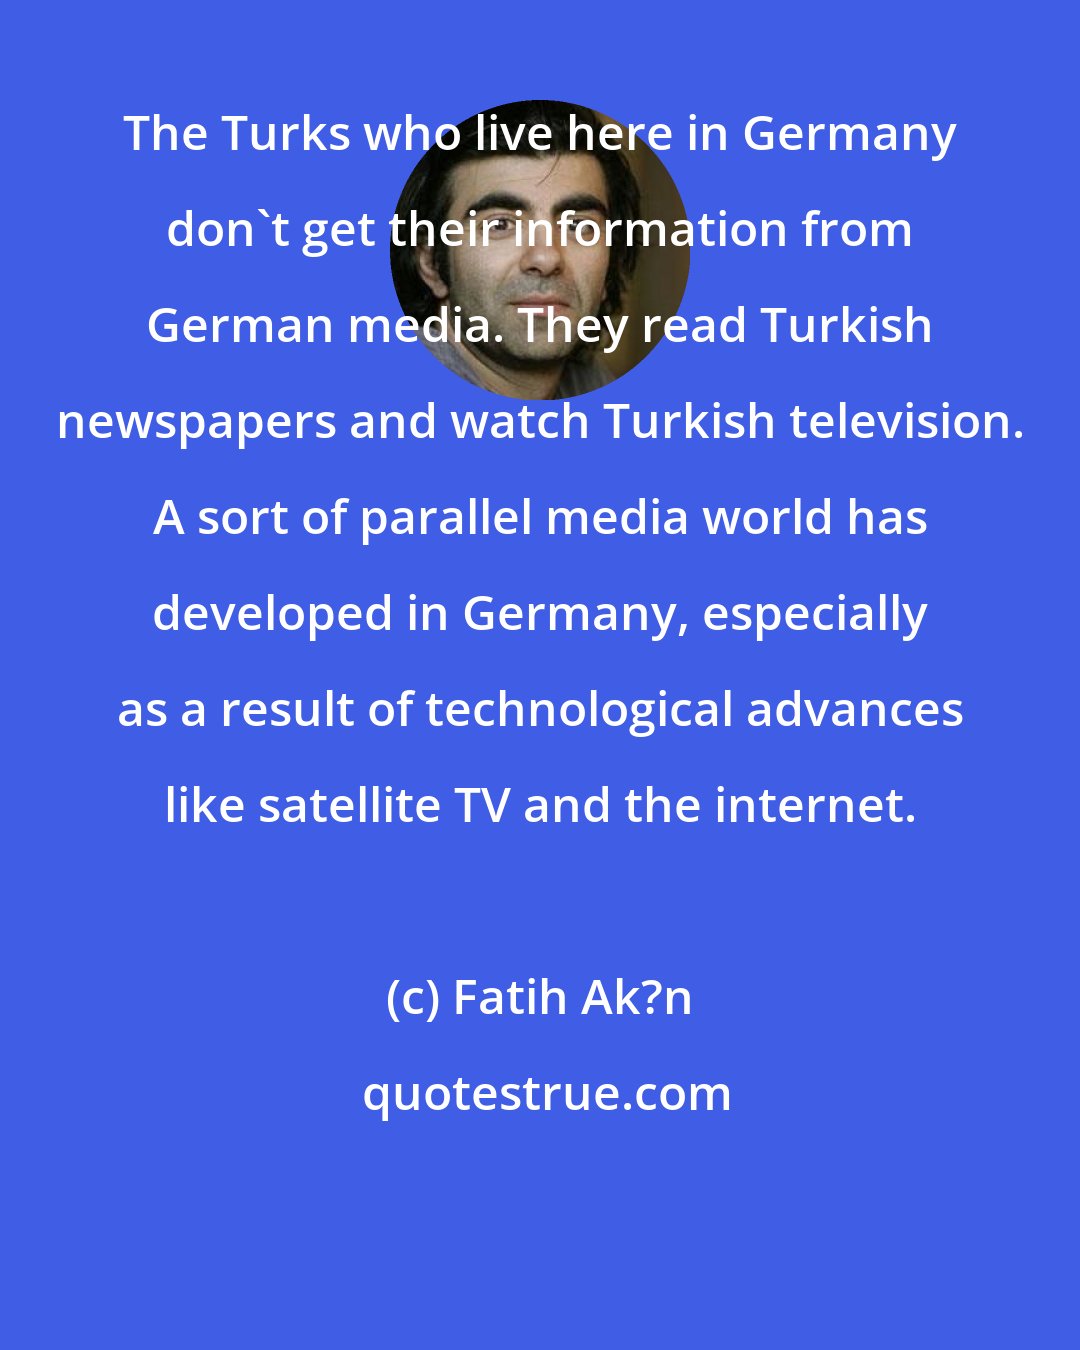 Fatih Ak?n: The Turks who live here in Germany don't get their information from German media. They read Turkish newspapers and watch Turkish television. A sort of parallel media world has developed in Germany, especially as a result of technological advances like satellite TV and the internet.